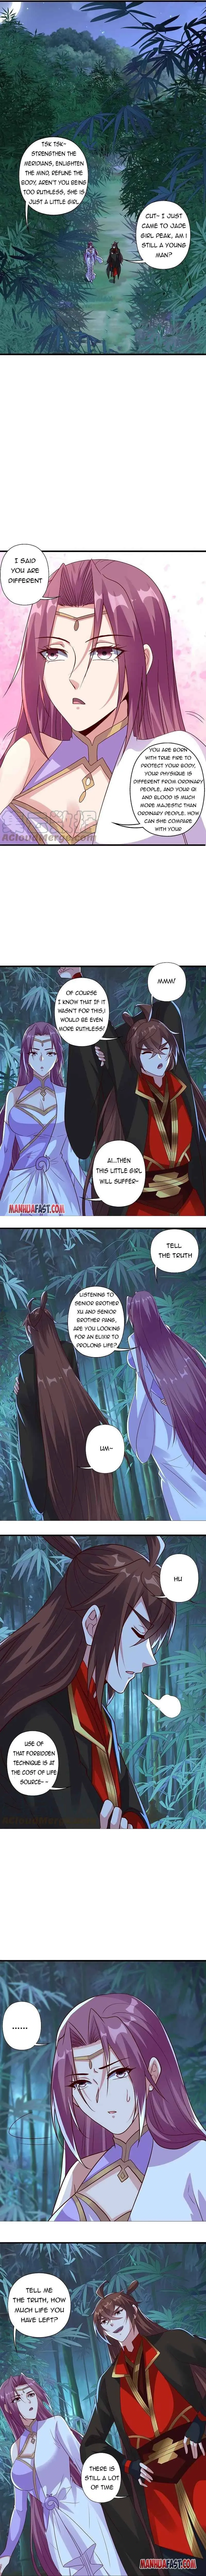 Banished Disciple's Counterattack Chapter 286 page 3